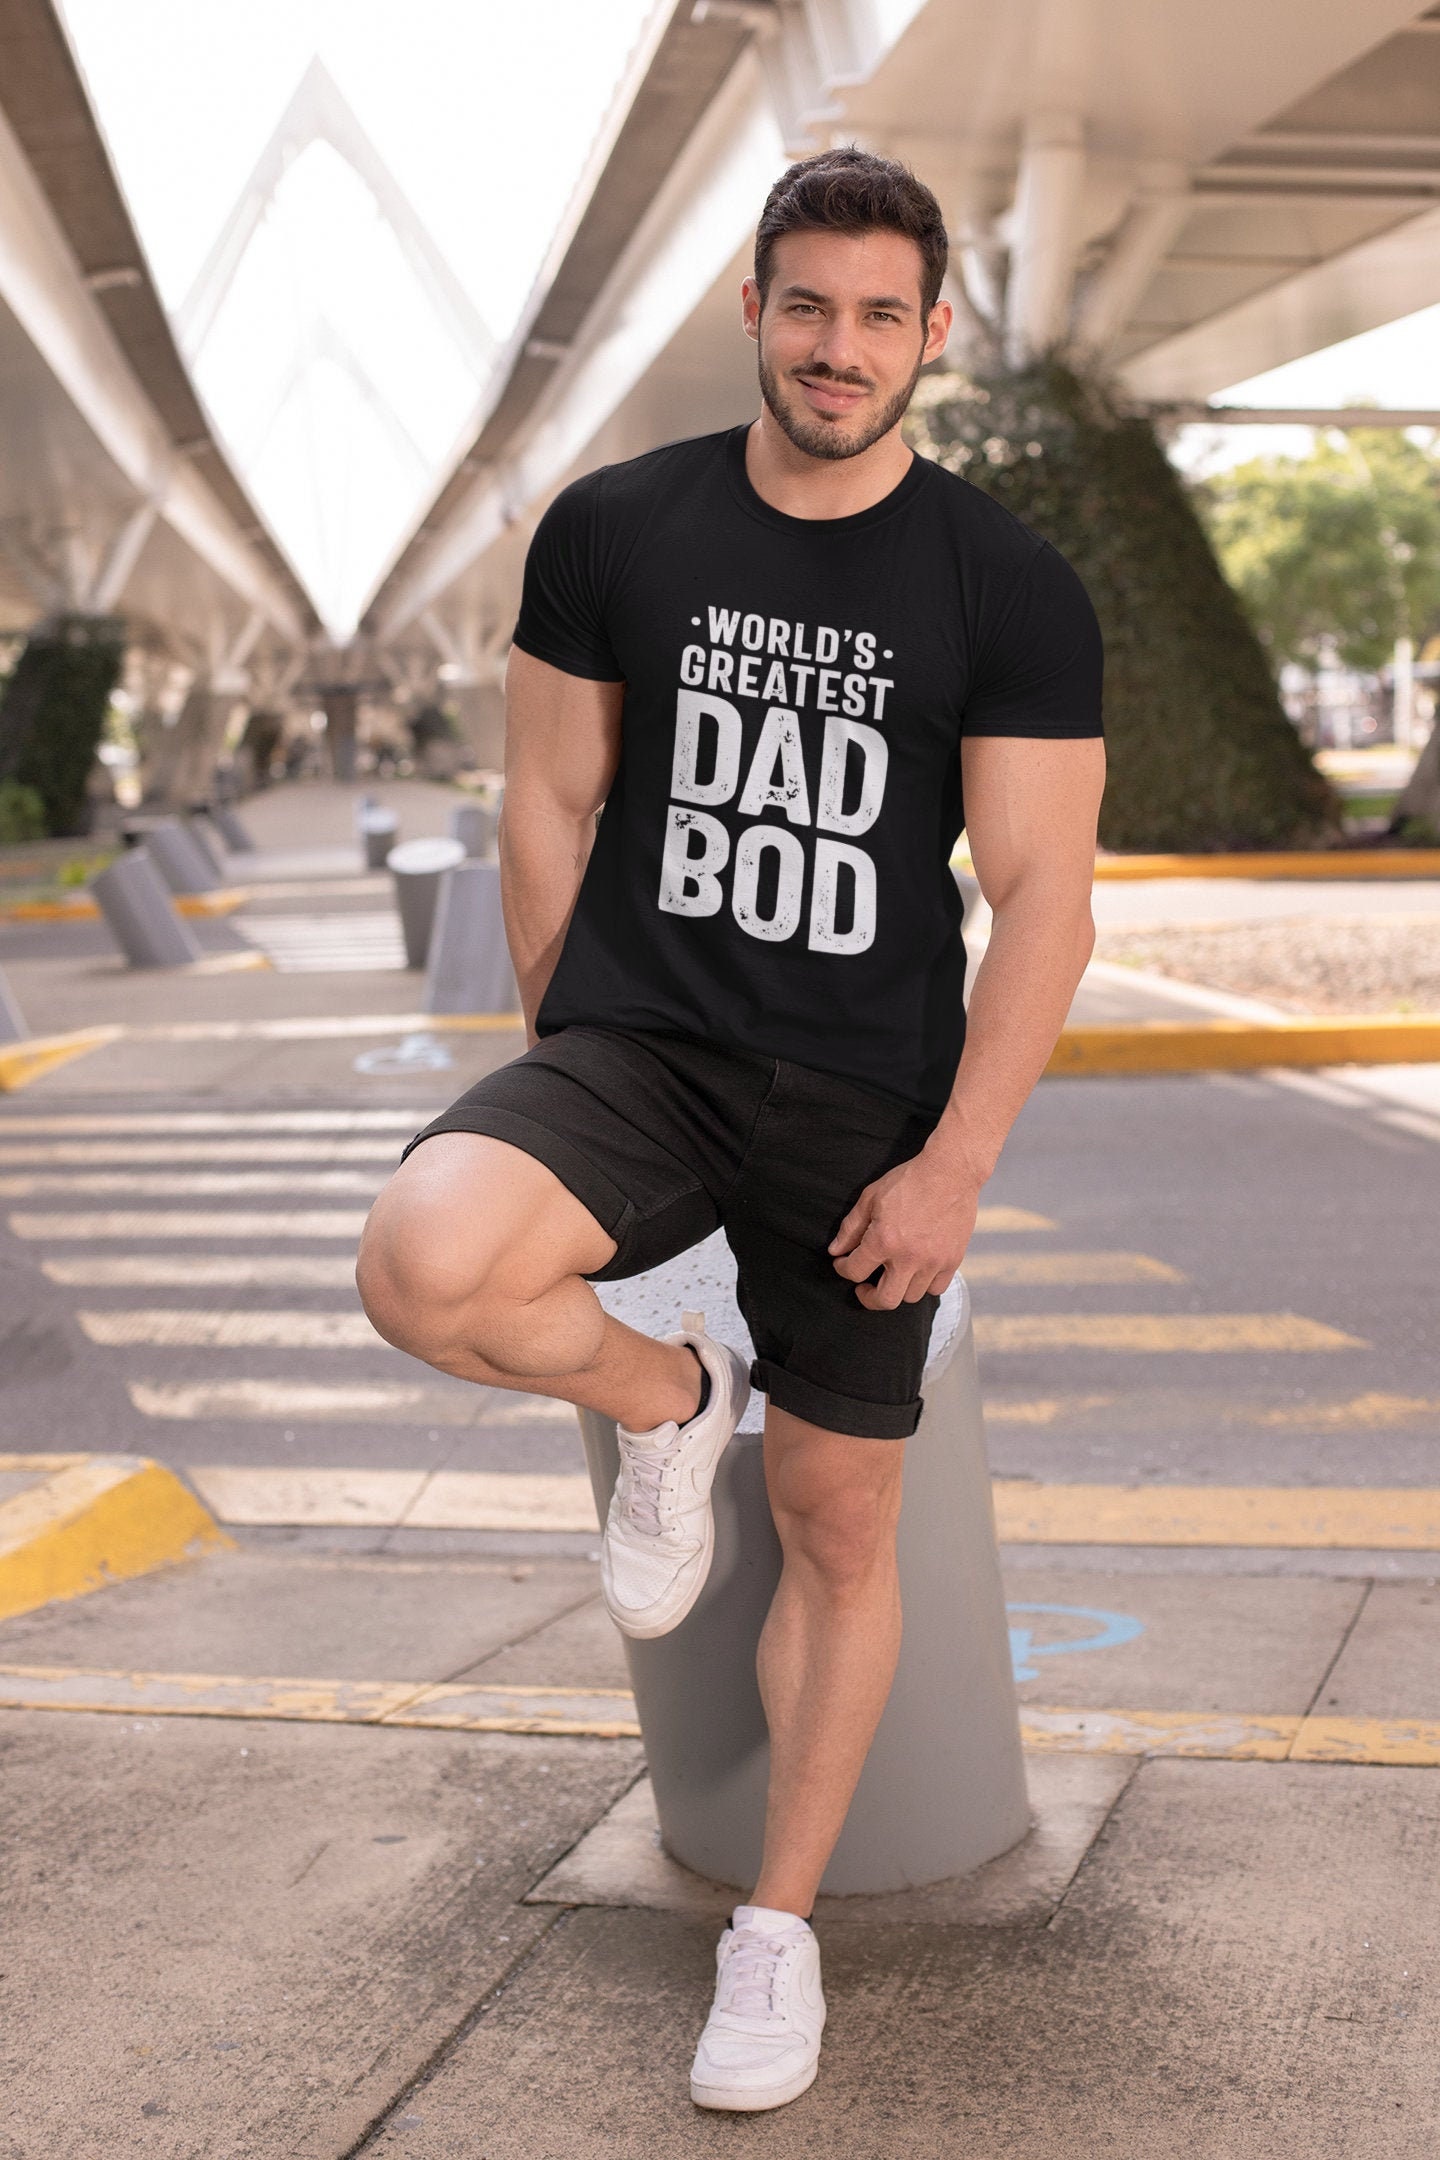 Worlds Greatest Dad Bod Funny Father’s Day Unisex T-Shirt